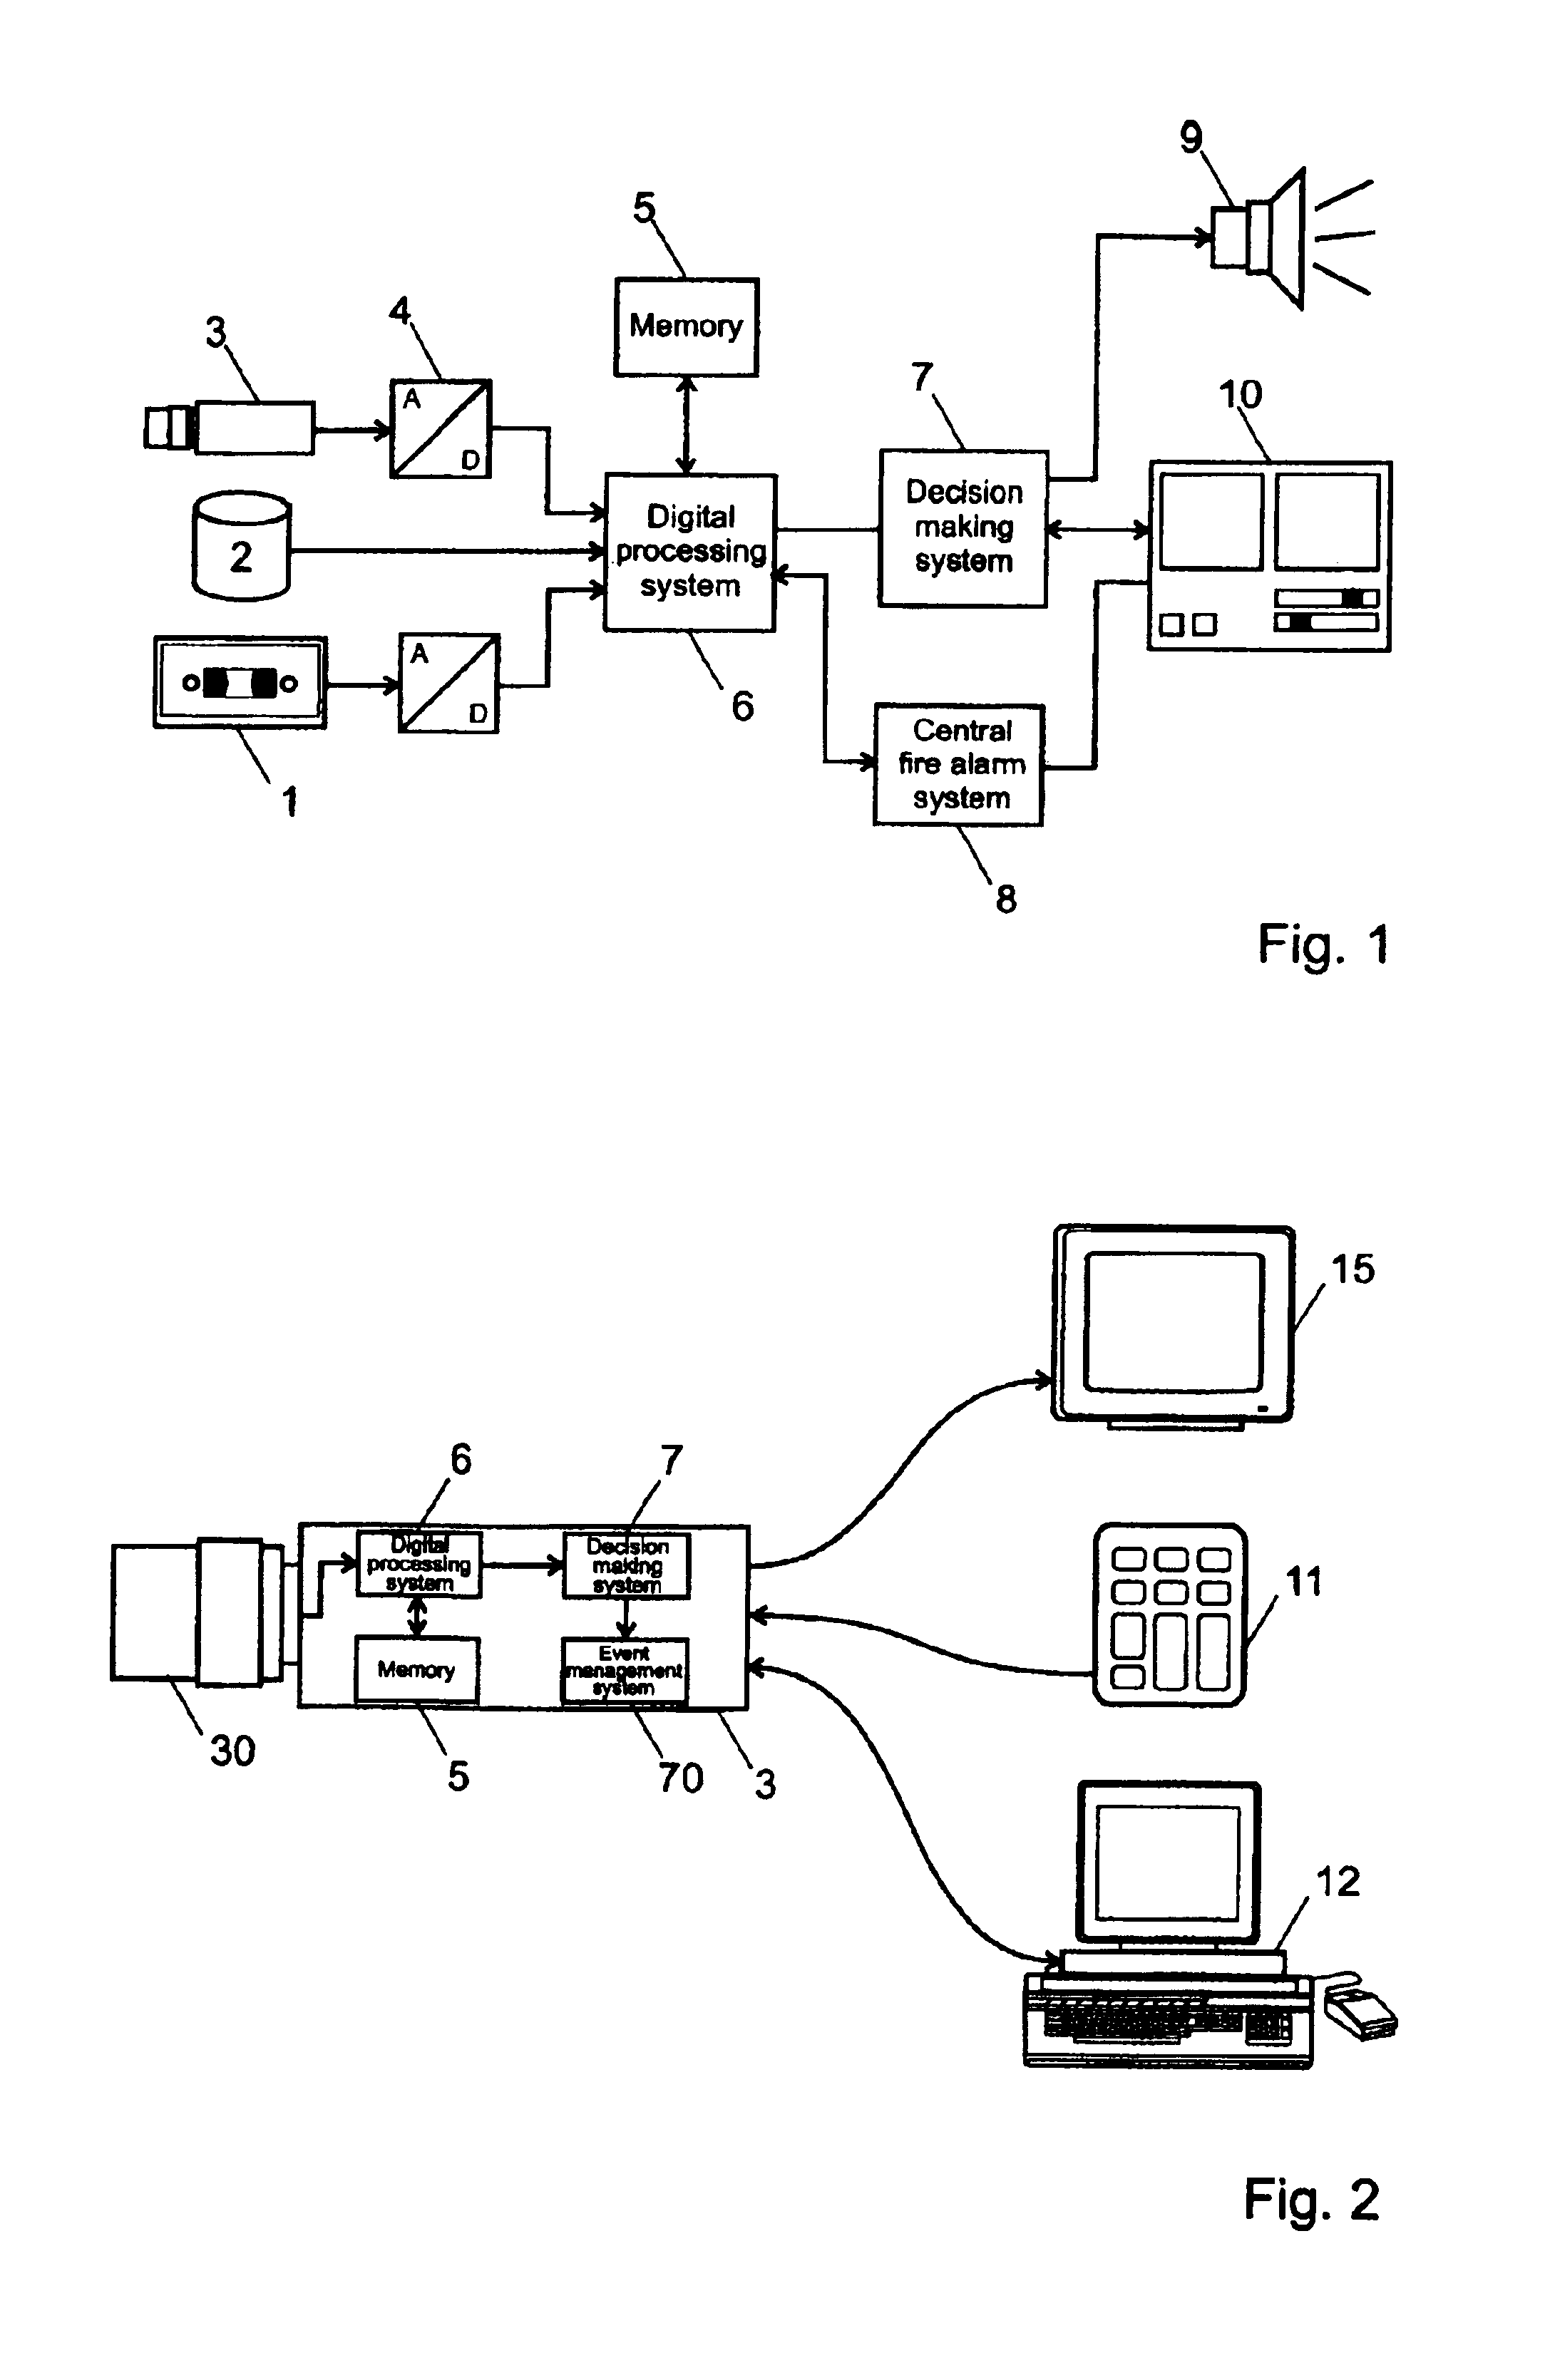 Process and device for detecting fires based on image analysis